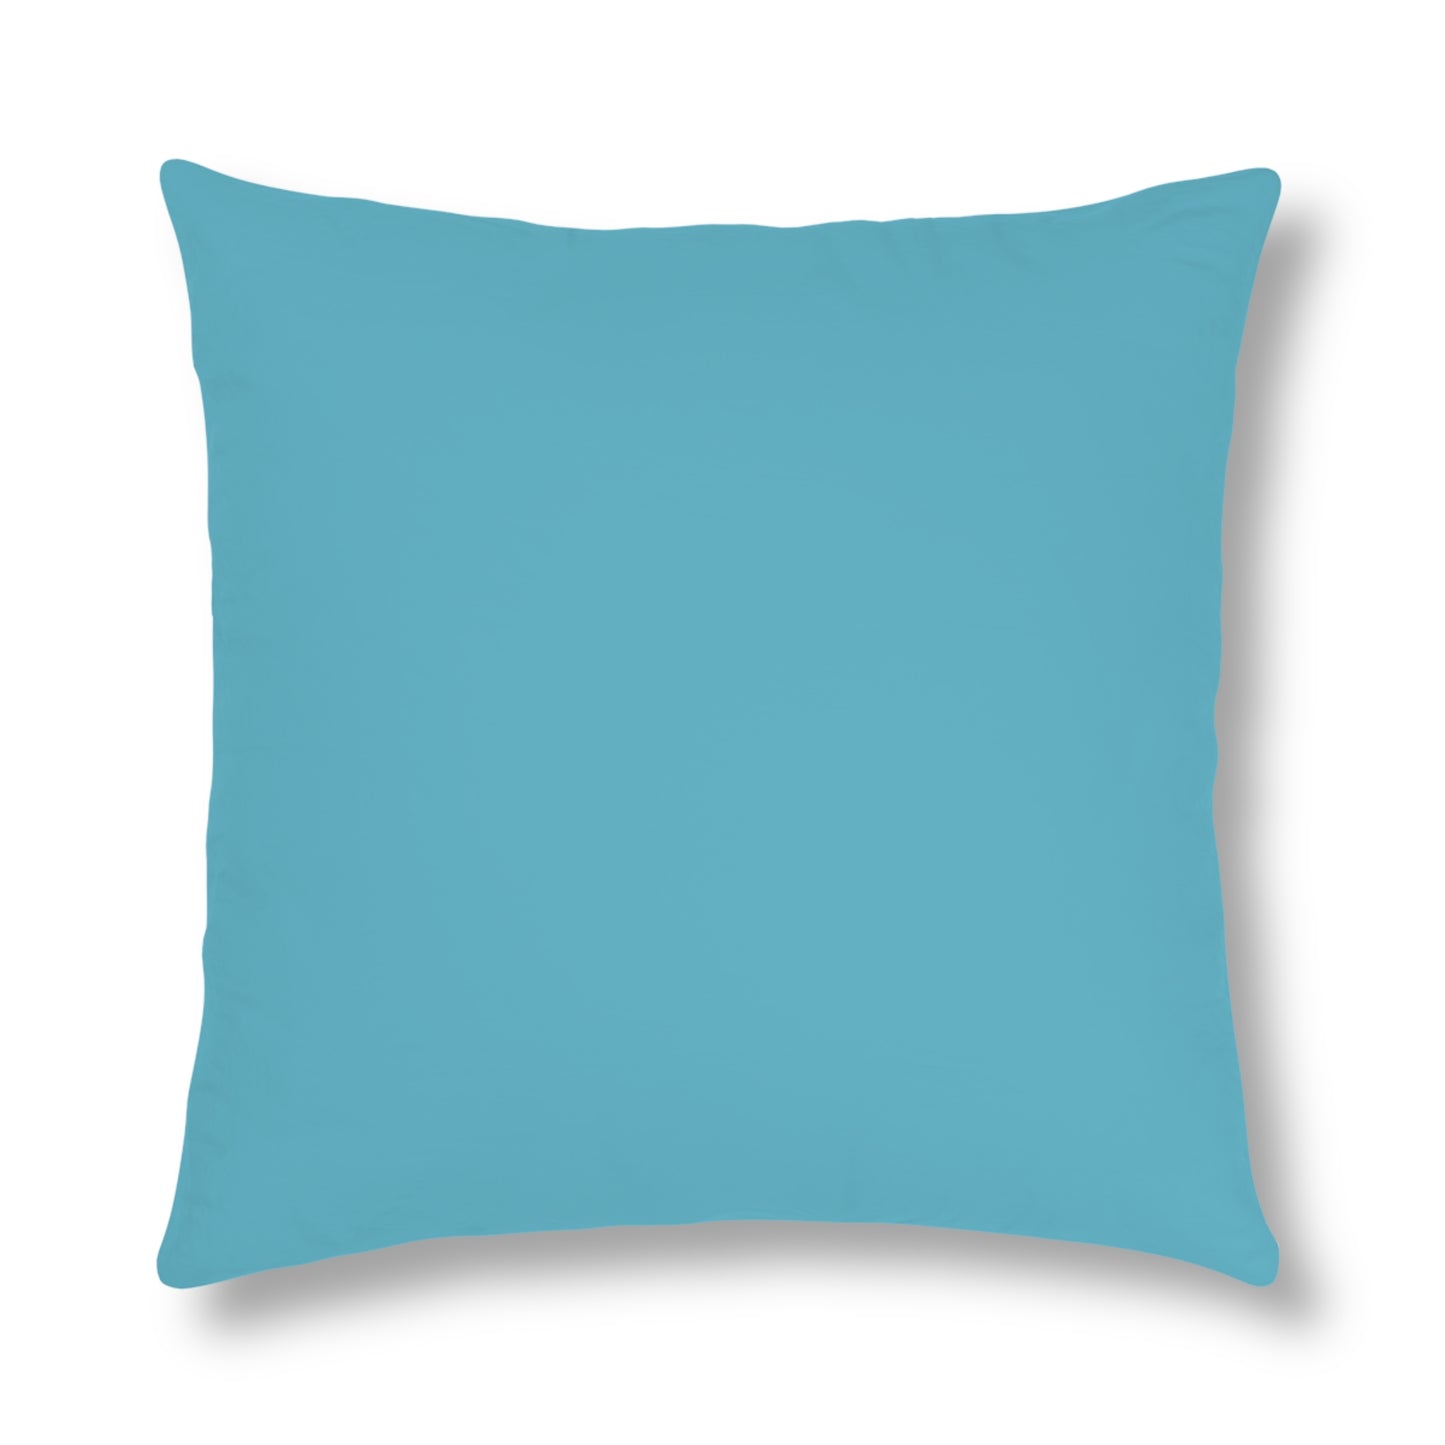 Chill for Best Results Blue - Waterproof Pillow